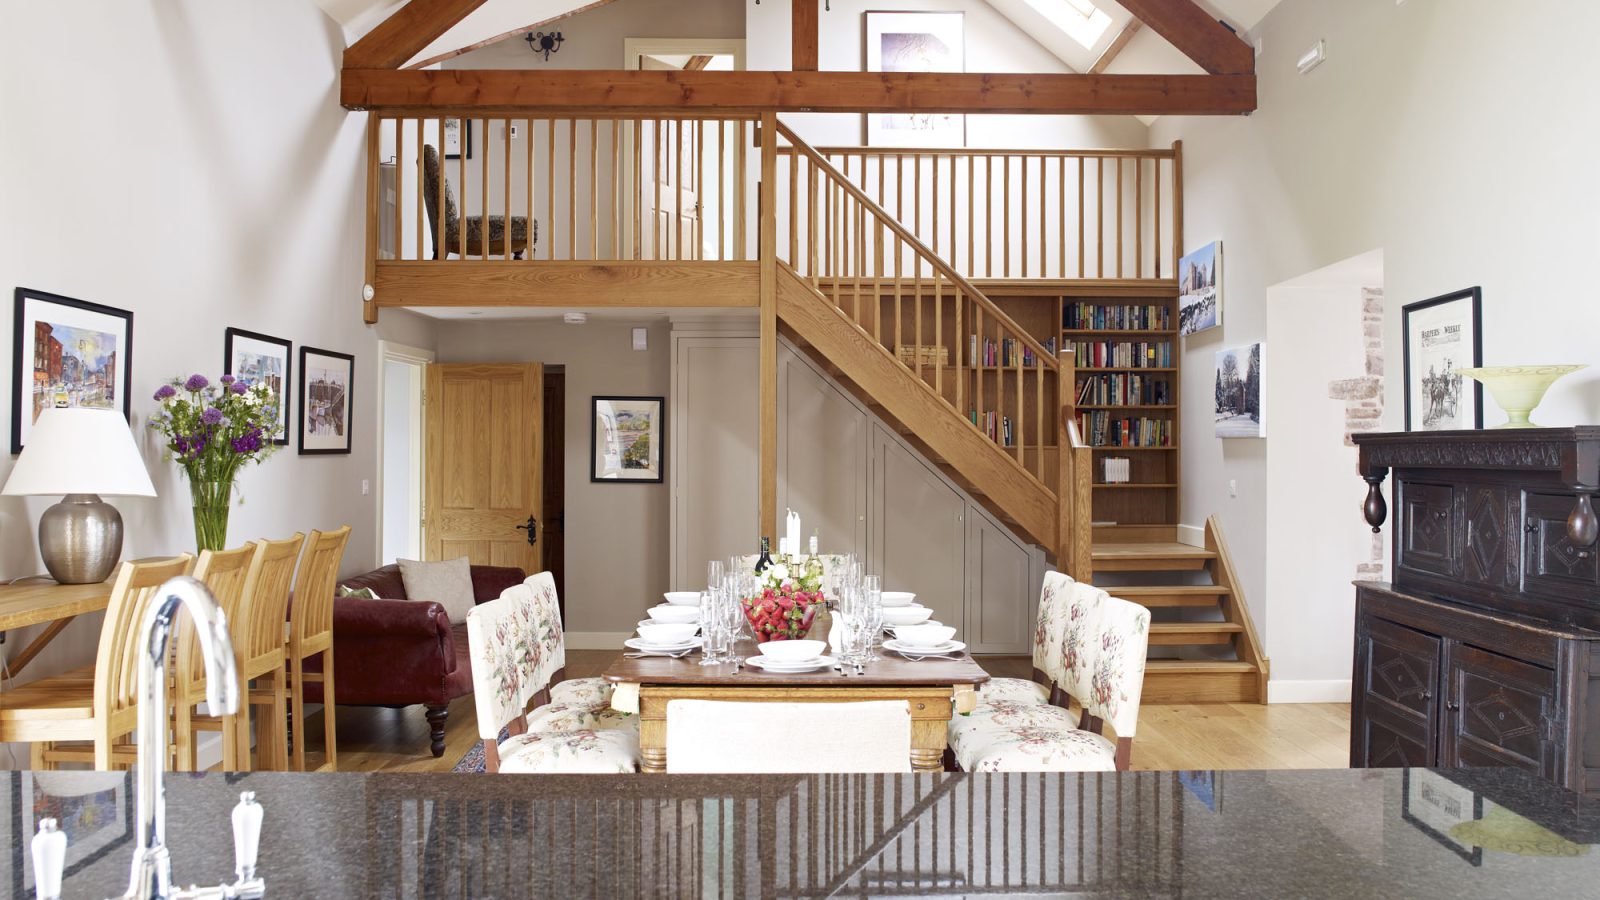 Birkmere Barn - kate & tom's Large Holiday Homes